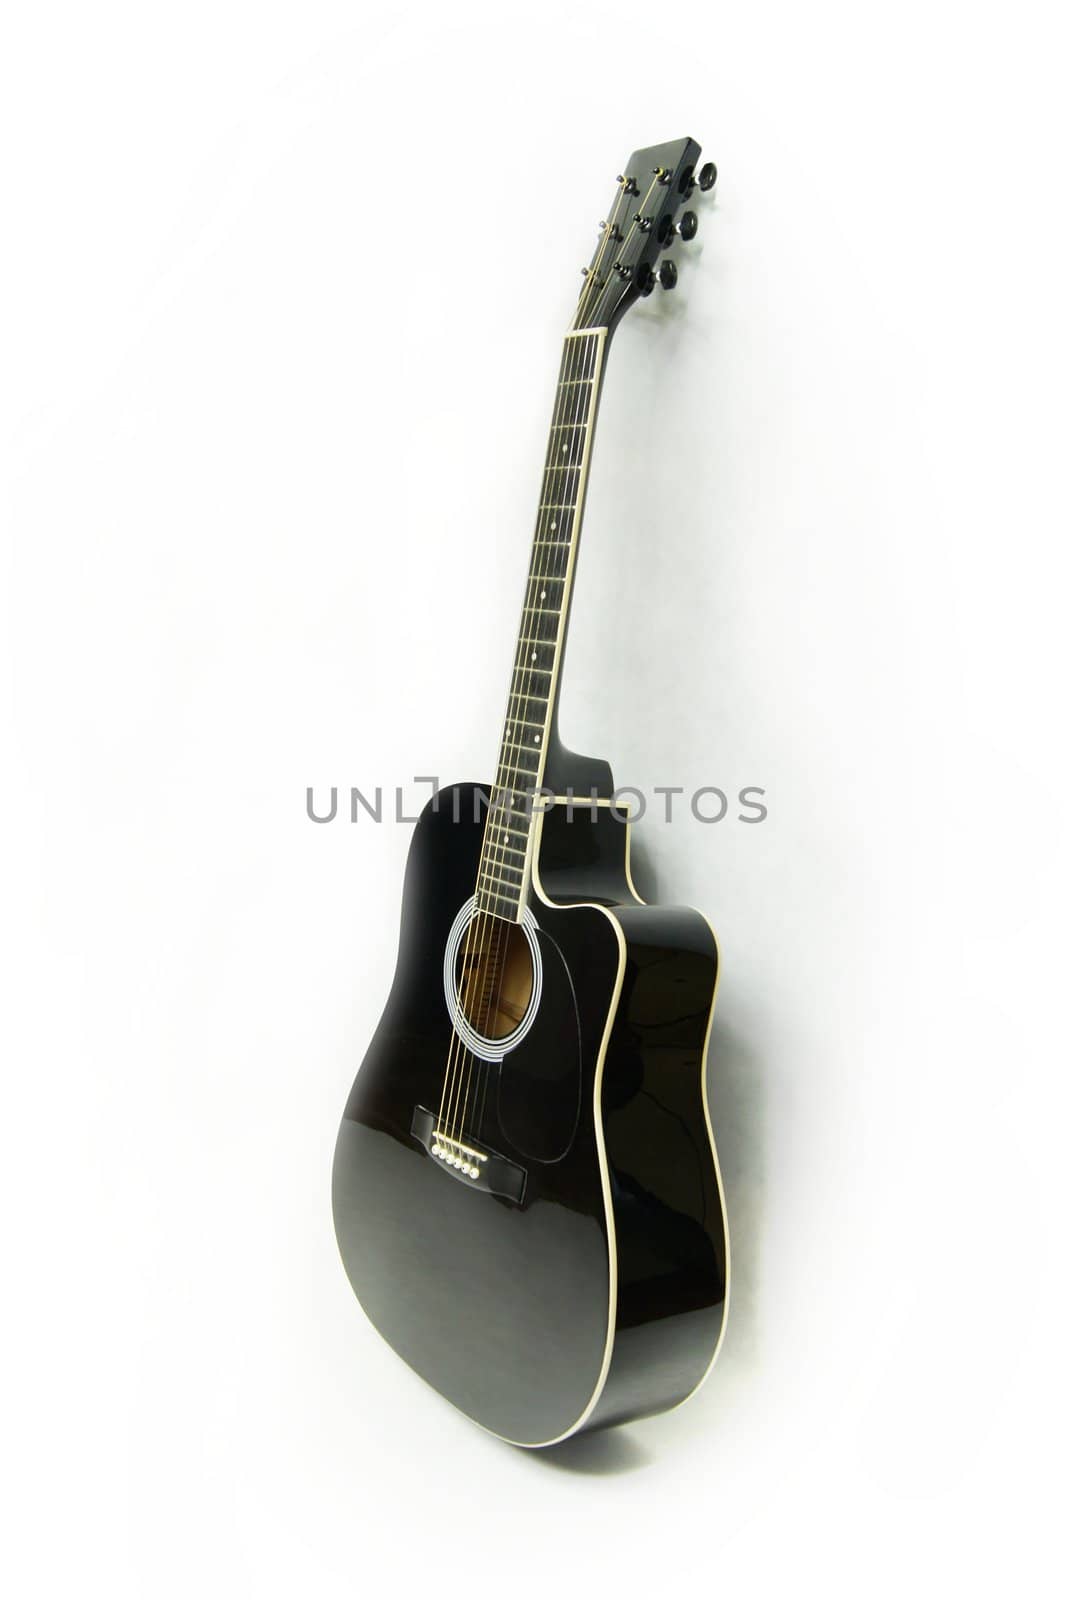 Black electro-acoustic guitar on white by simpson33